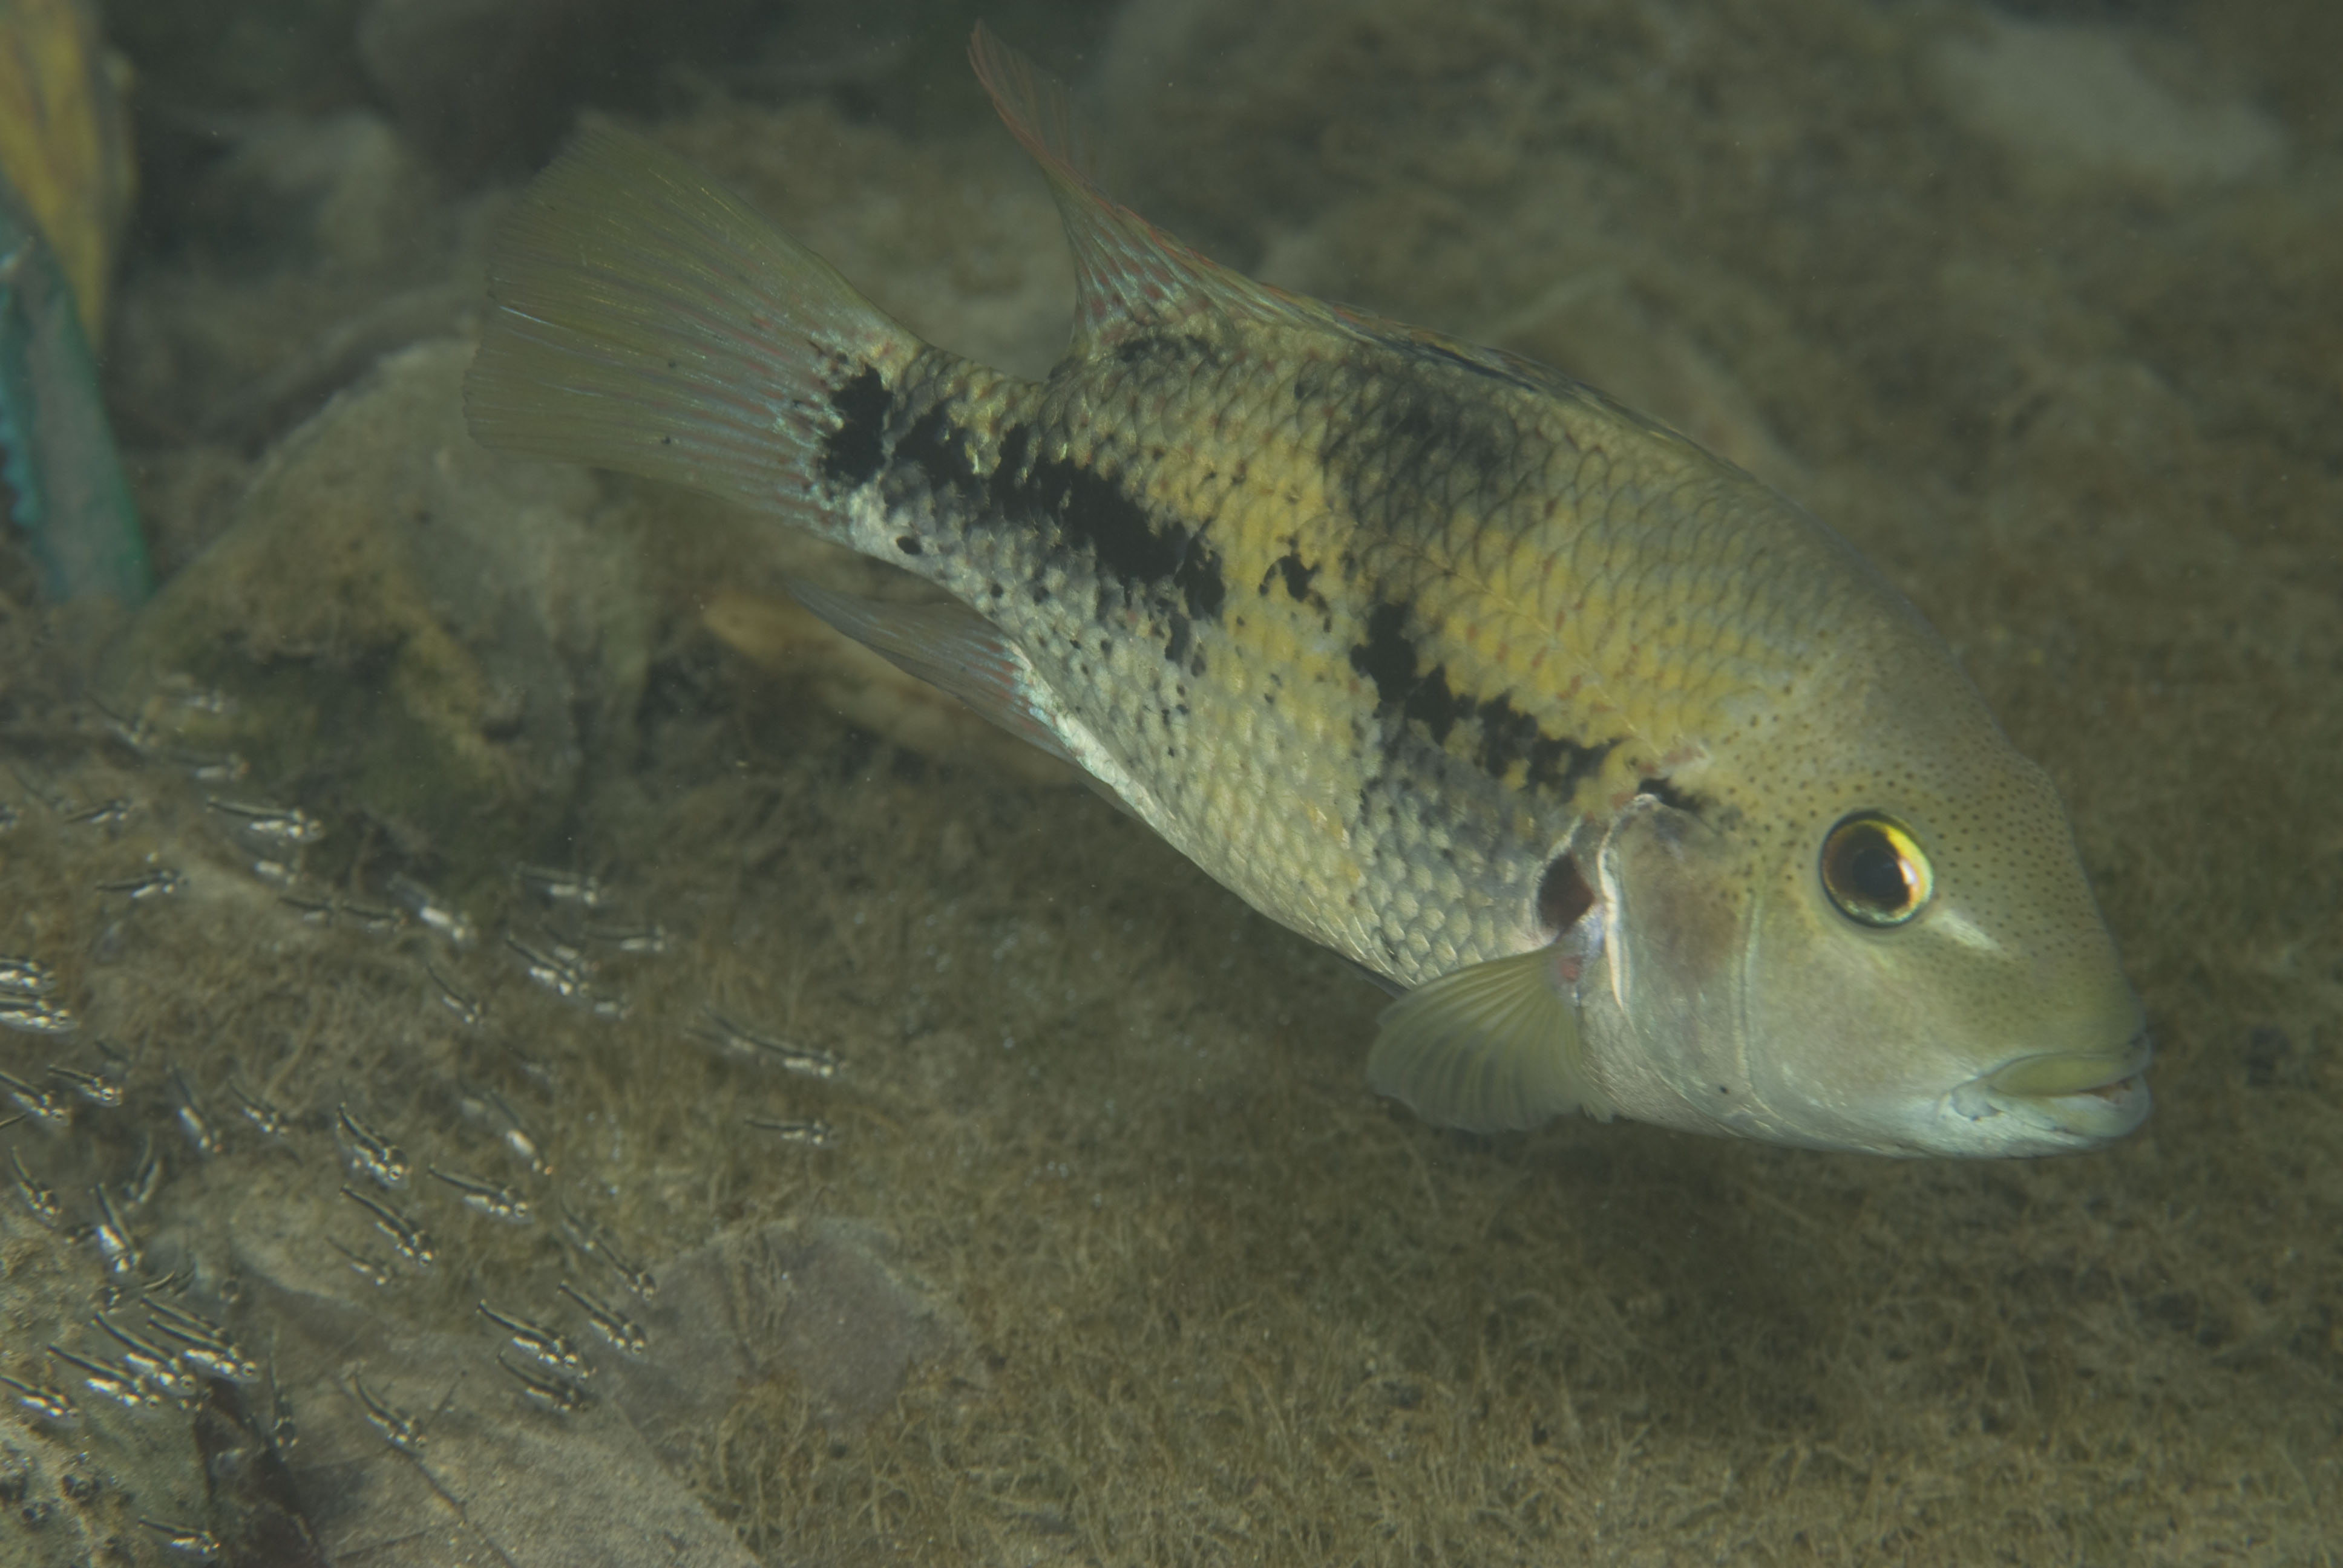 Nosferatu (Herichthys) pantostictus with fry; Photographed in Panuco drainage of Mexico by Rusty Wessel